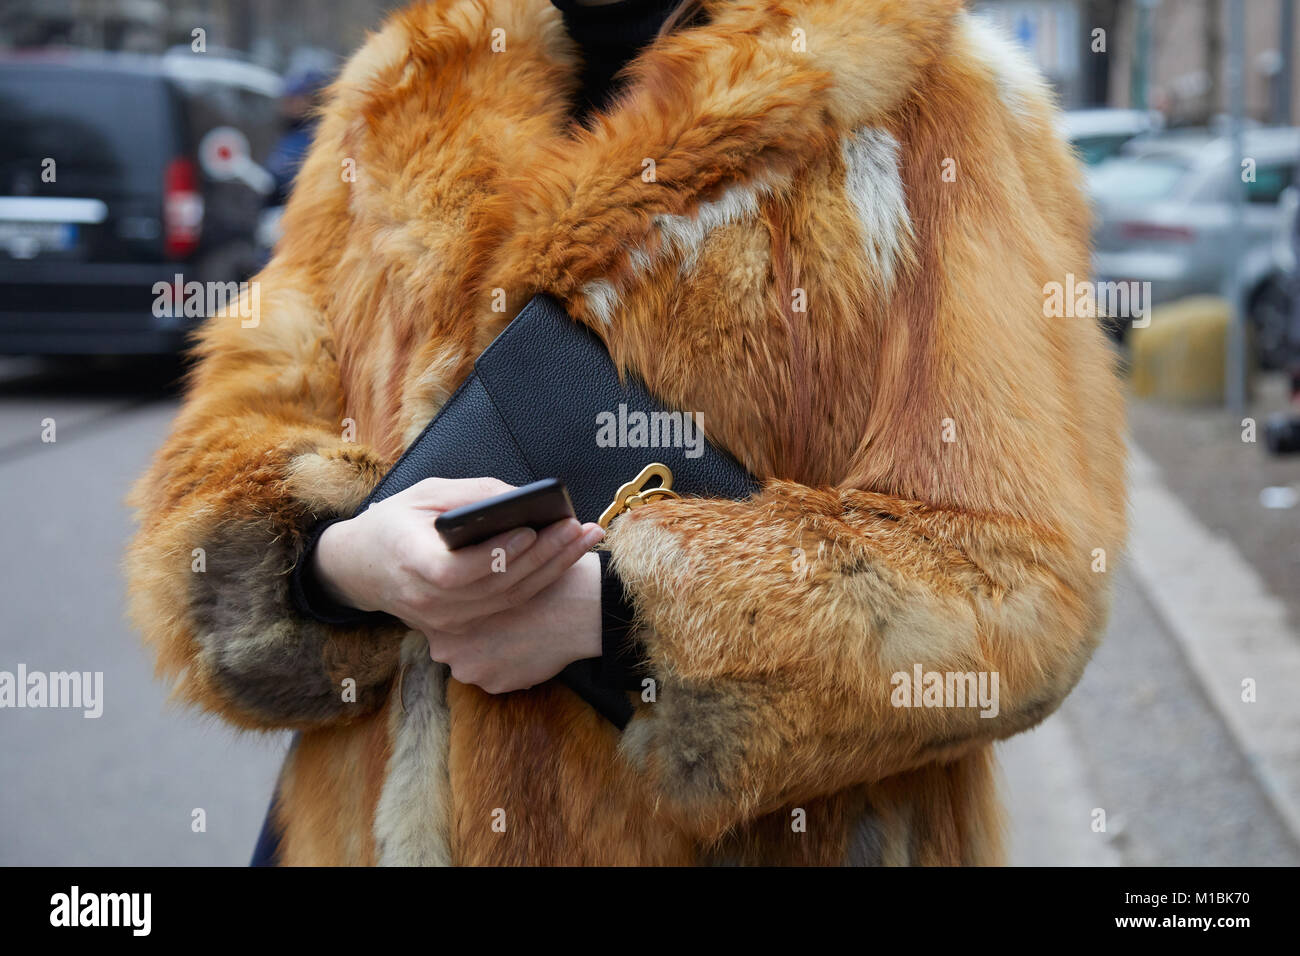 Woman with red fox fur coat looking at 